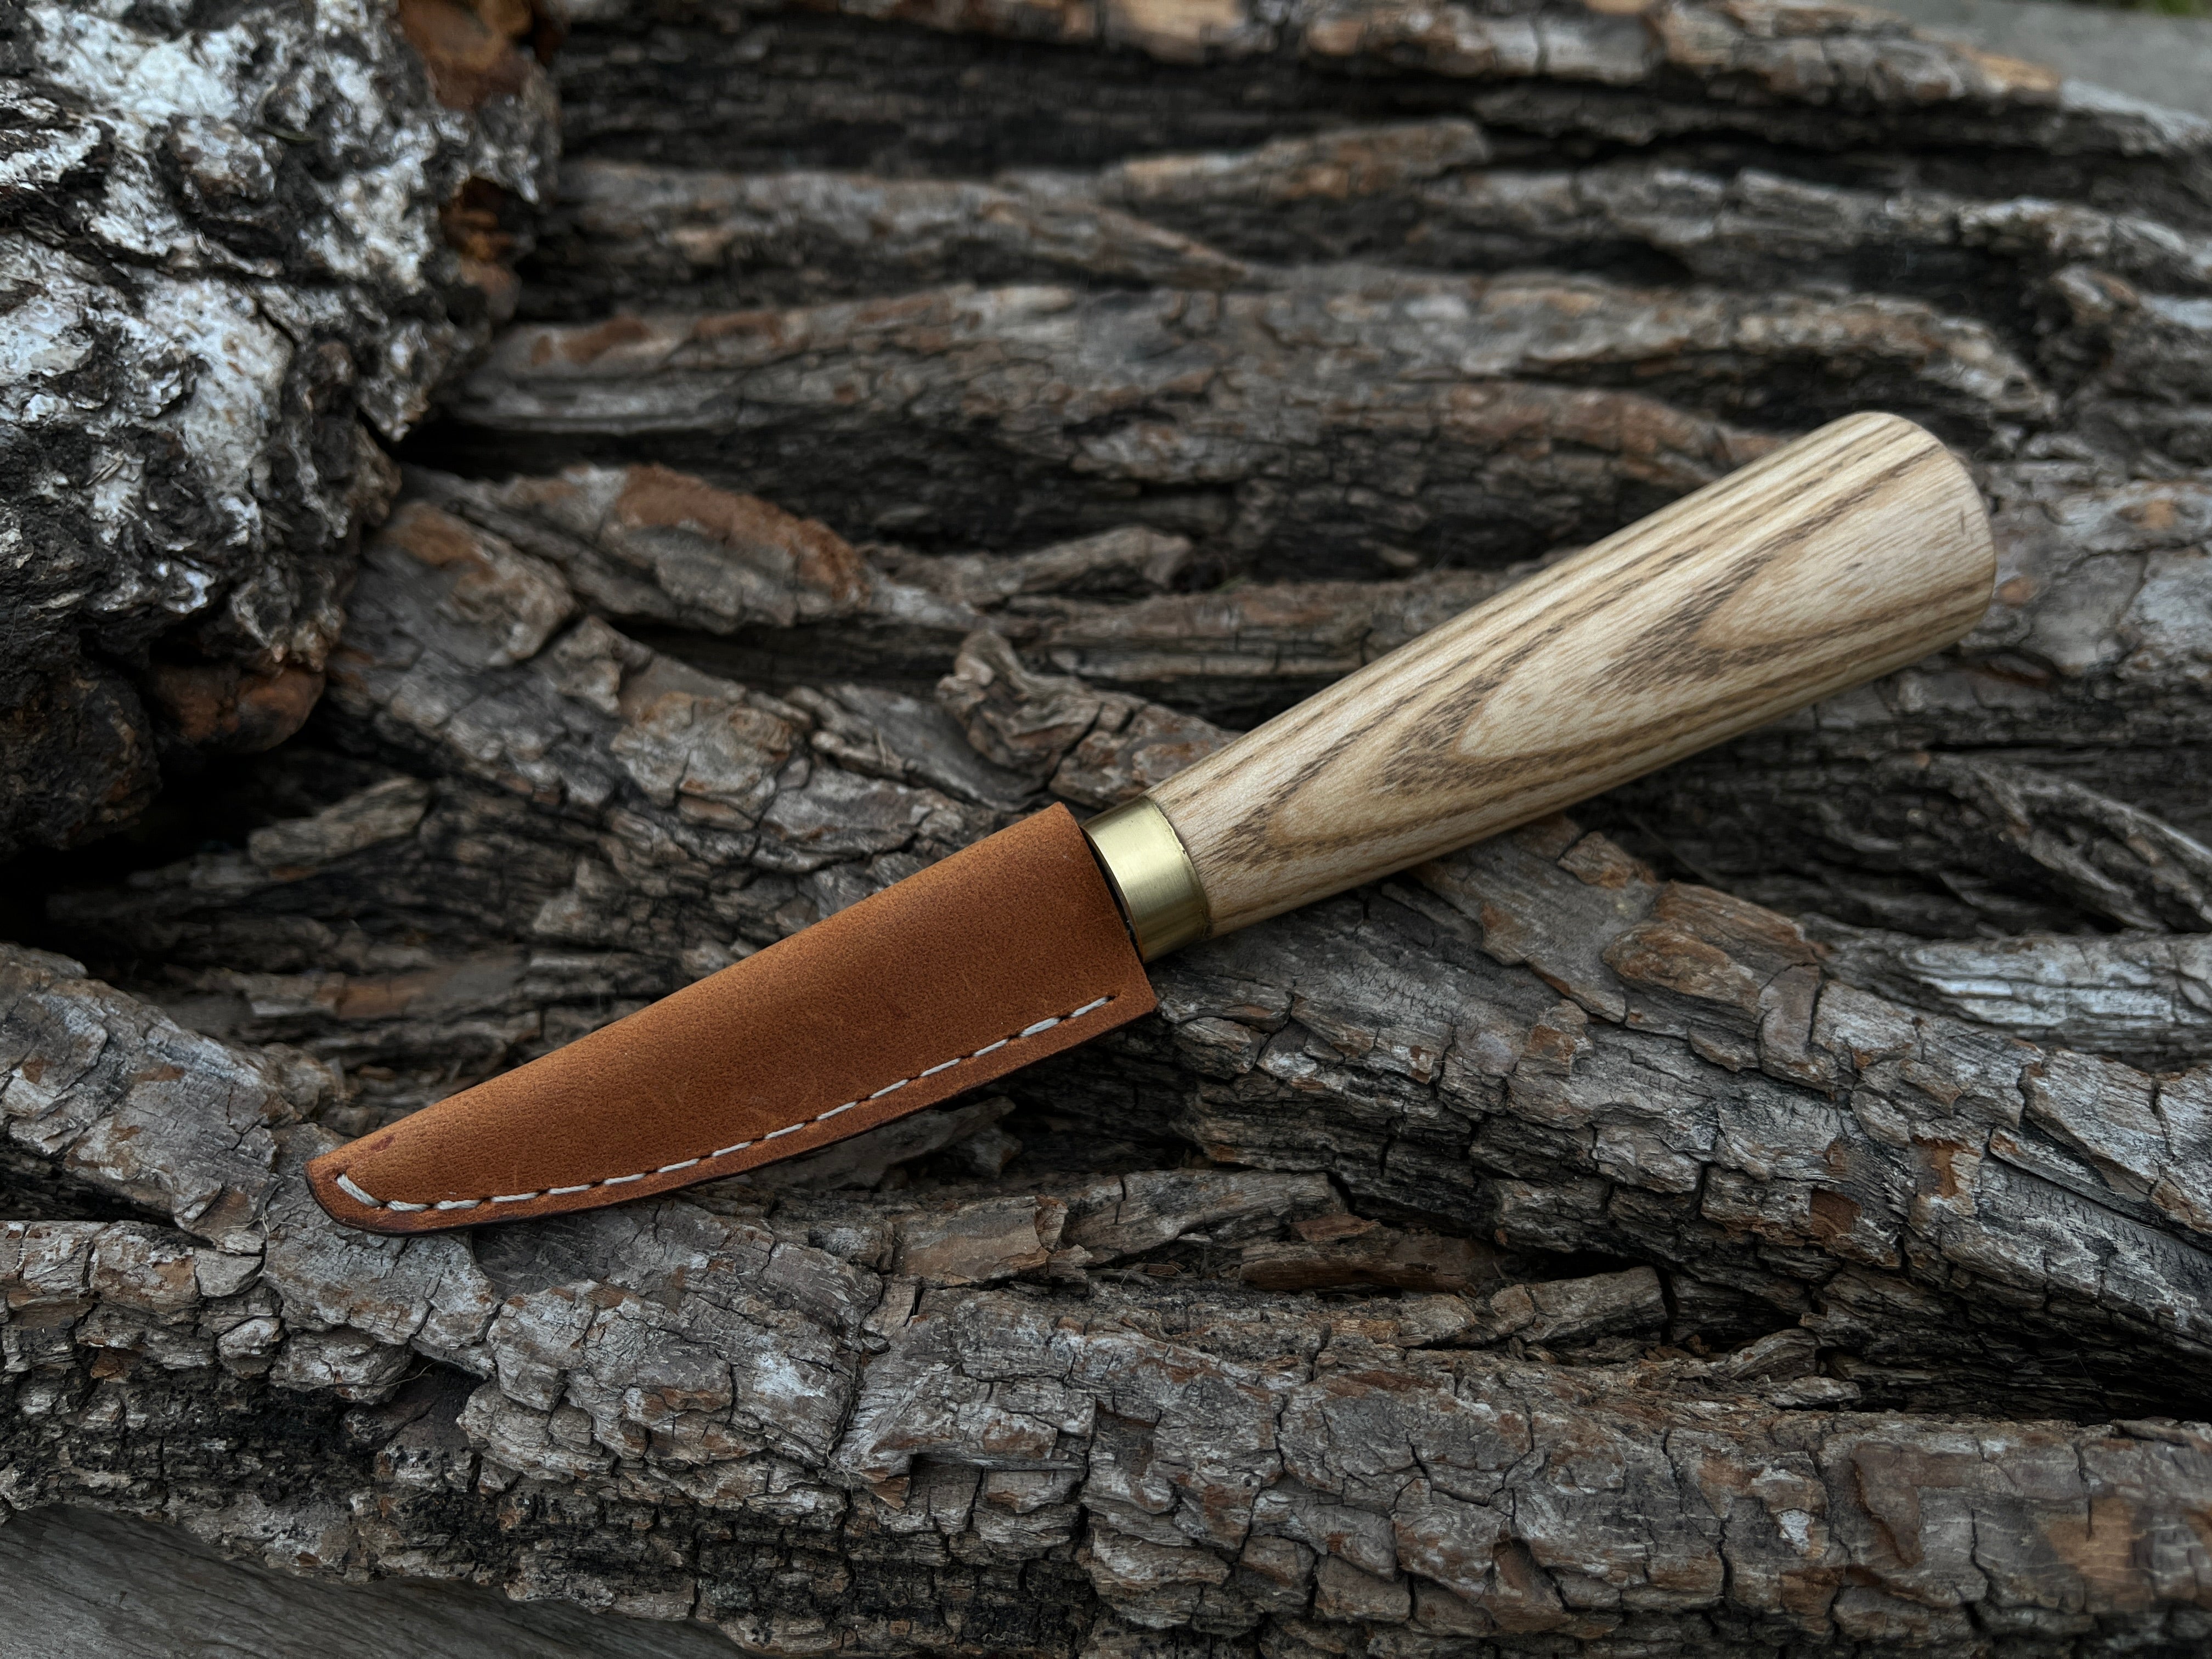 Hand-Forged Whittling Sloyd Knife, 7 cm (2.8 inches)